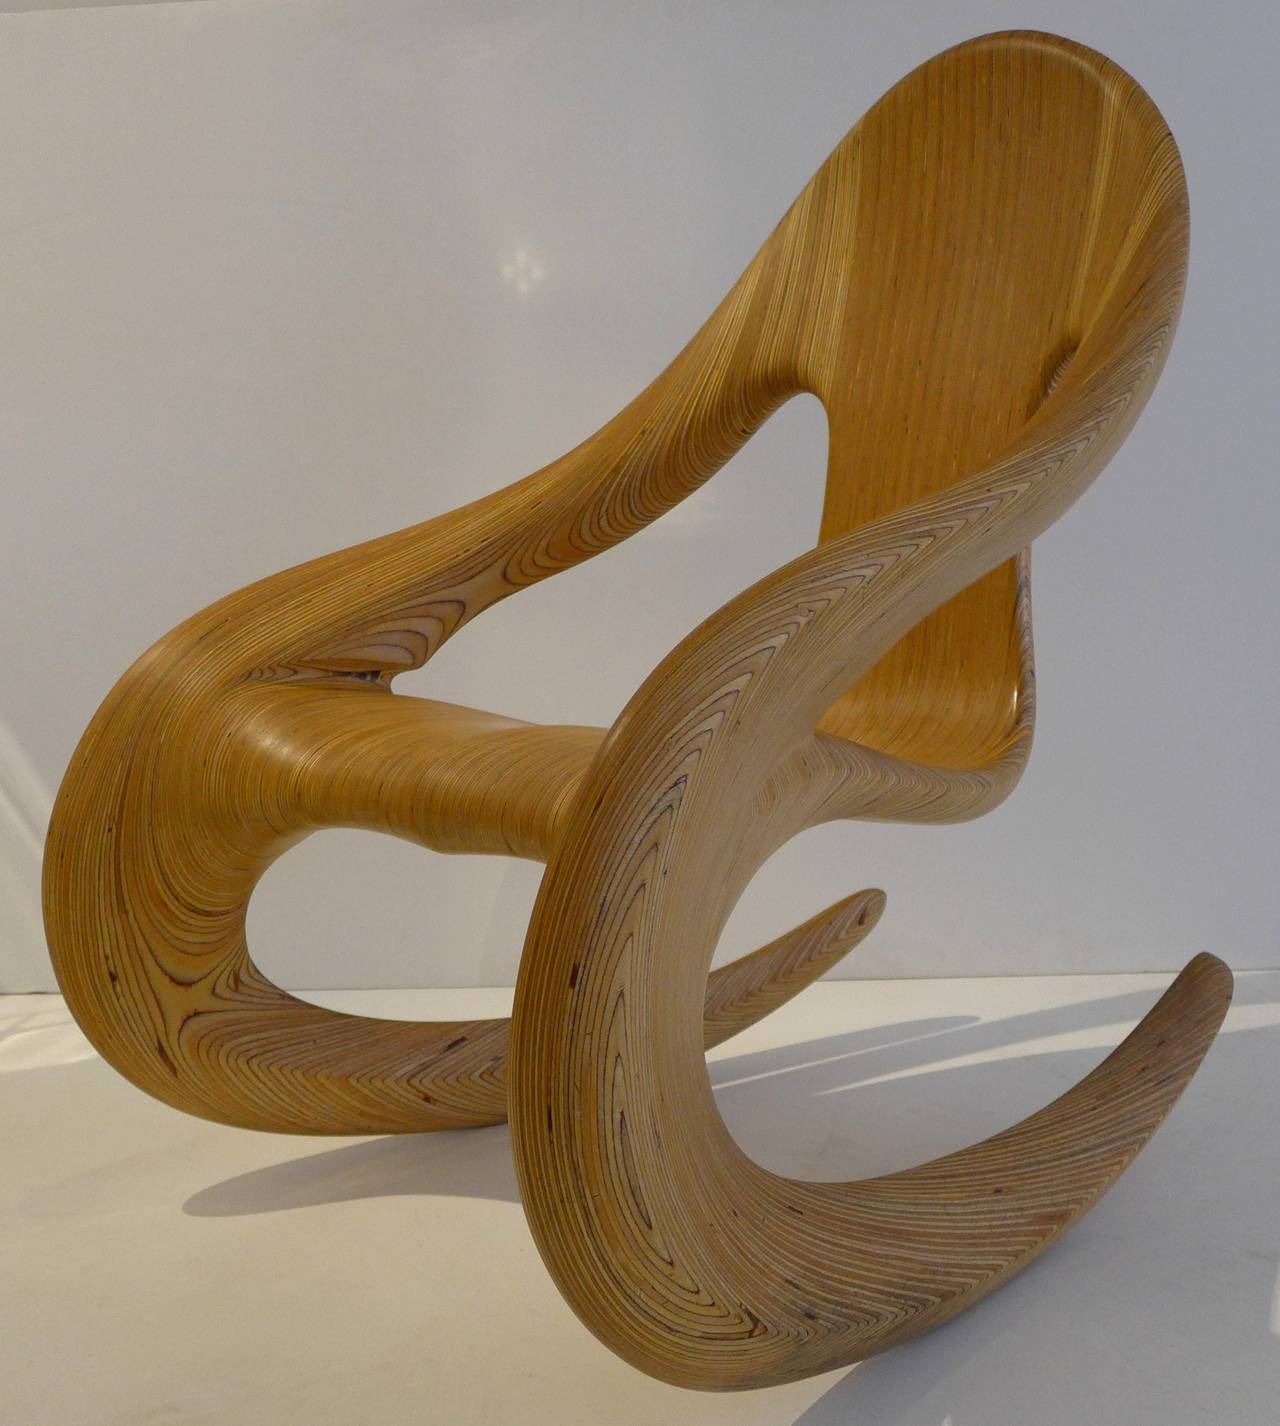 Dramatically sinuous, yet comfortable, rocker by Wisconsin woodworker Carl Gromoll (b. 1950), executed in 1987. Meticulously and intensively handcrafted of stack-laminated, carved, and polished Baltic birch. Gromoll began making wooden objects in